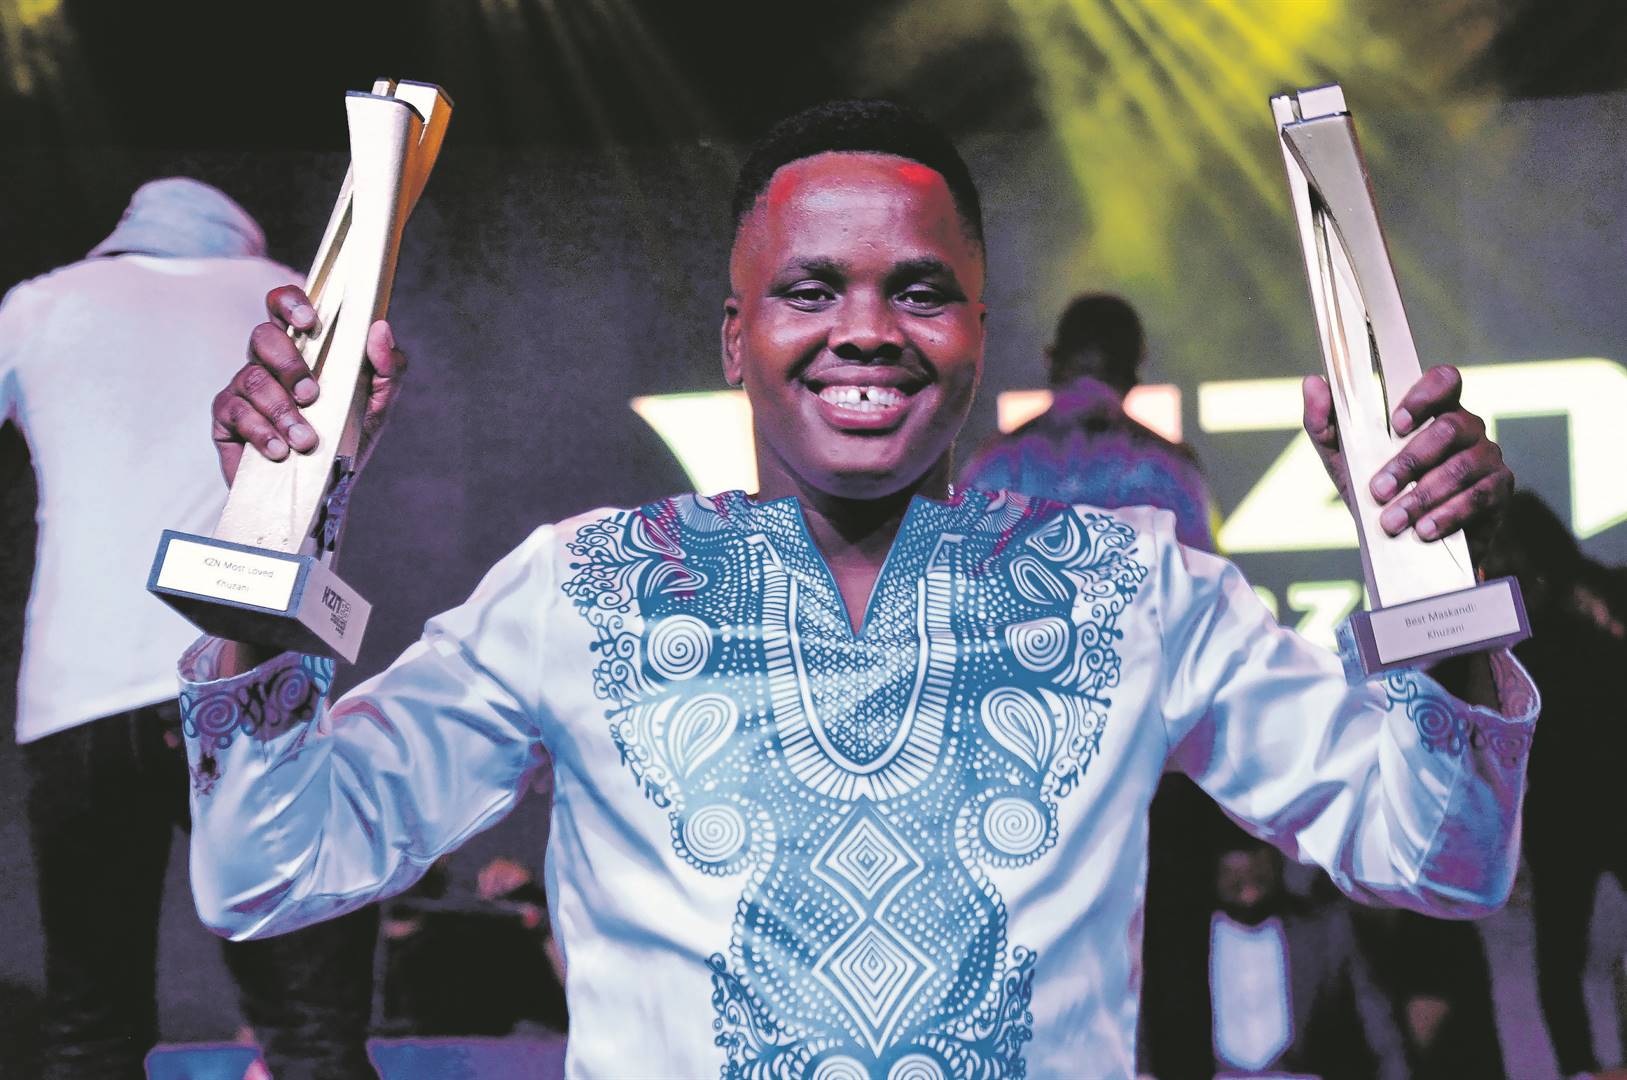 FANS GET FRONT ROW SEAT TO MASKANDI STARS’ LIVES! Daily Sun